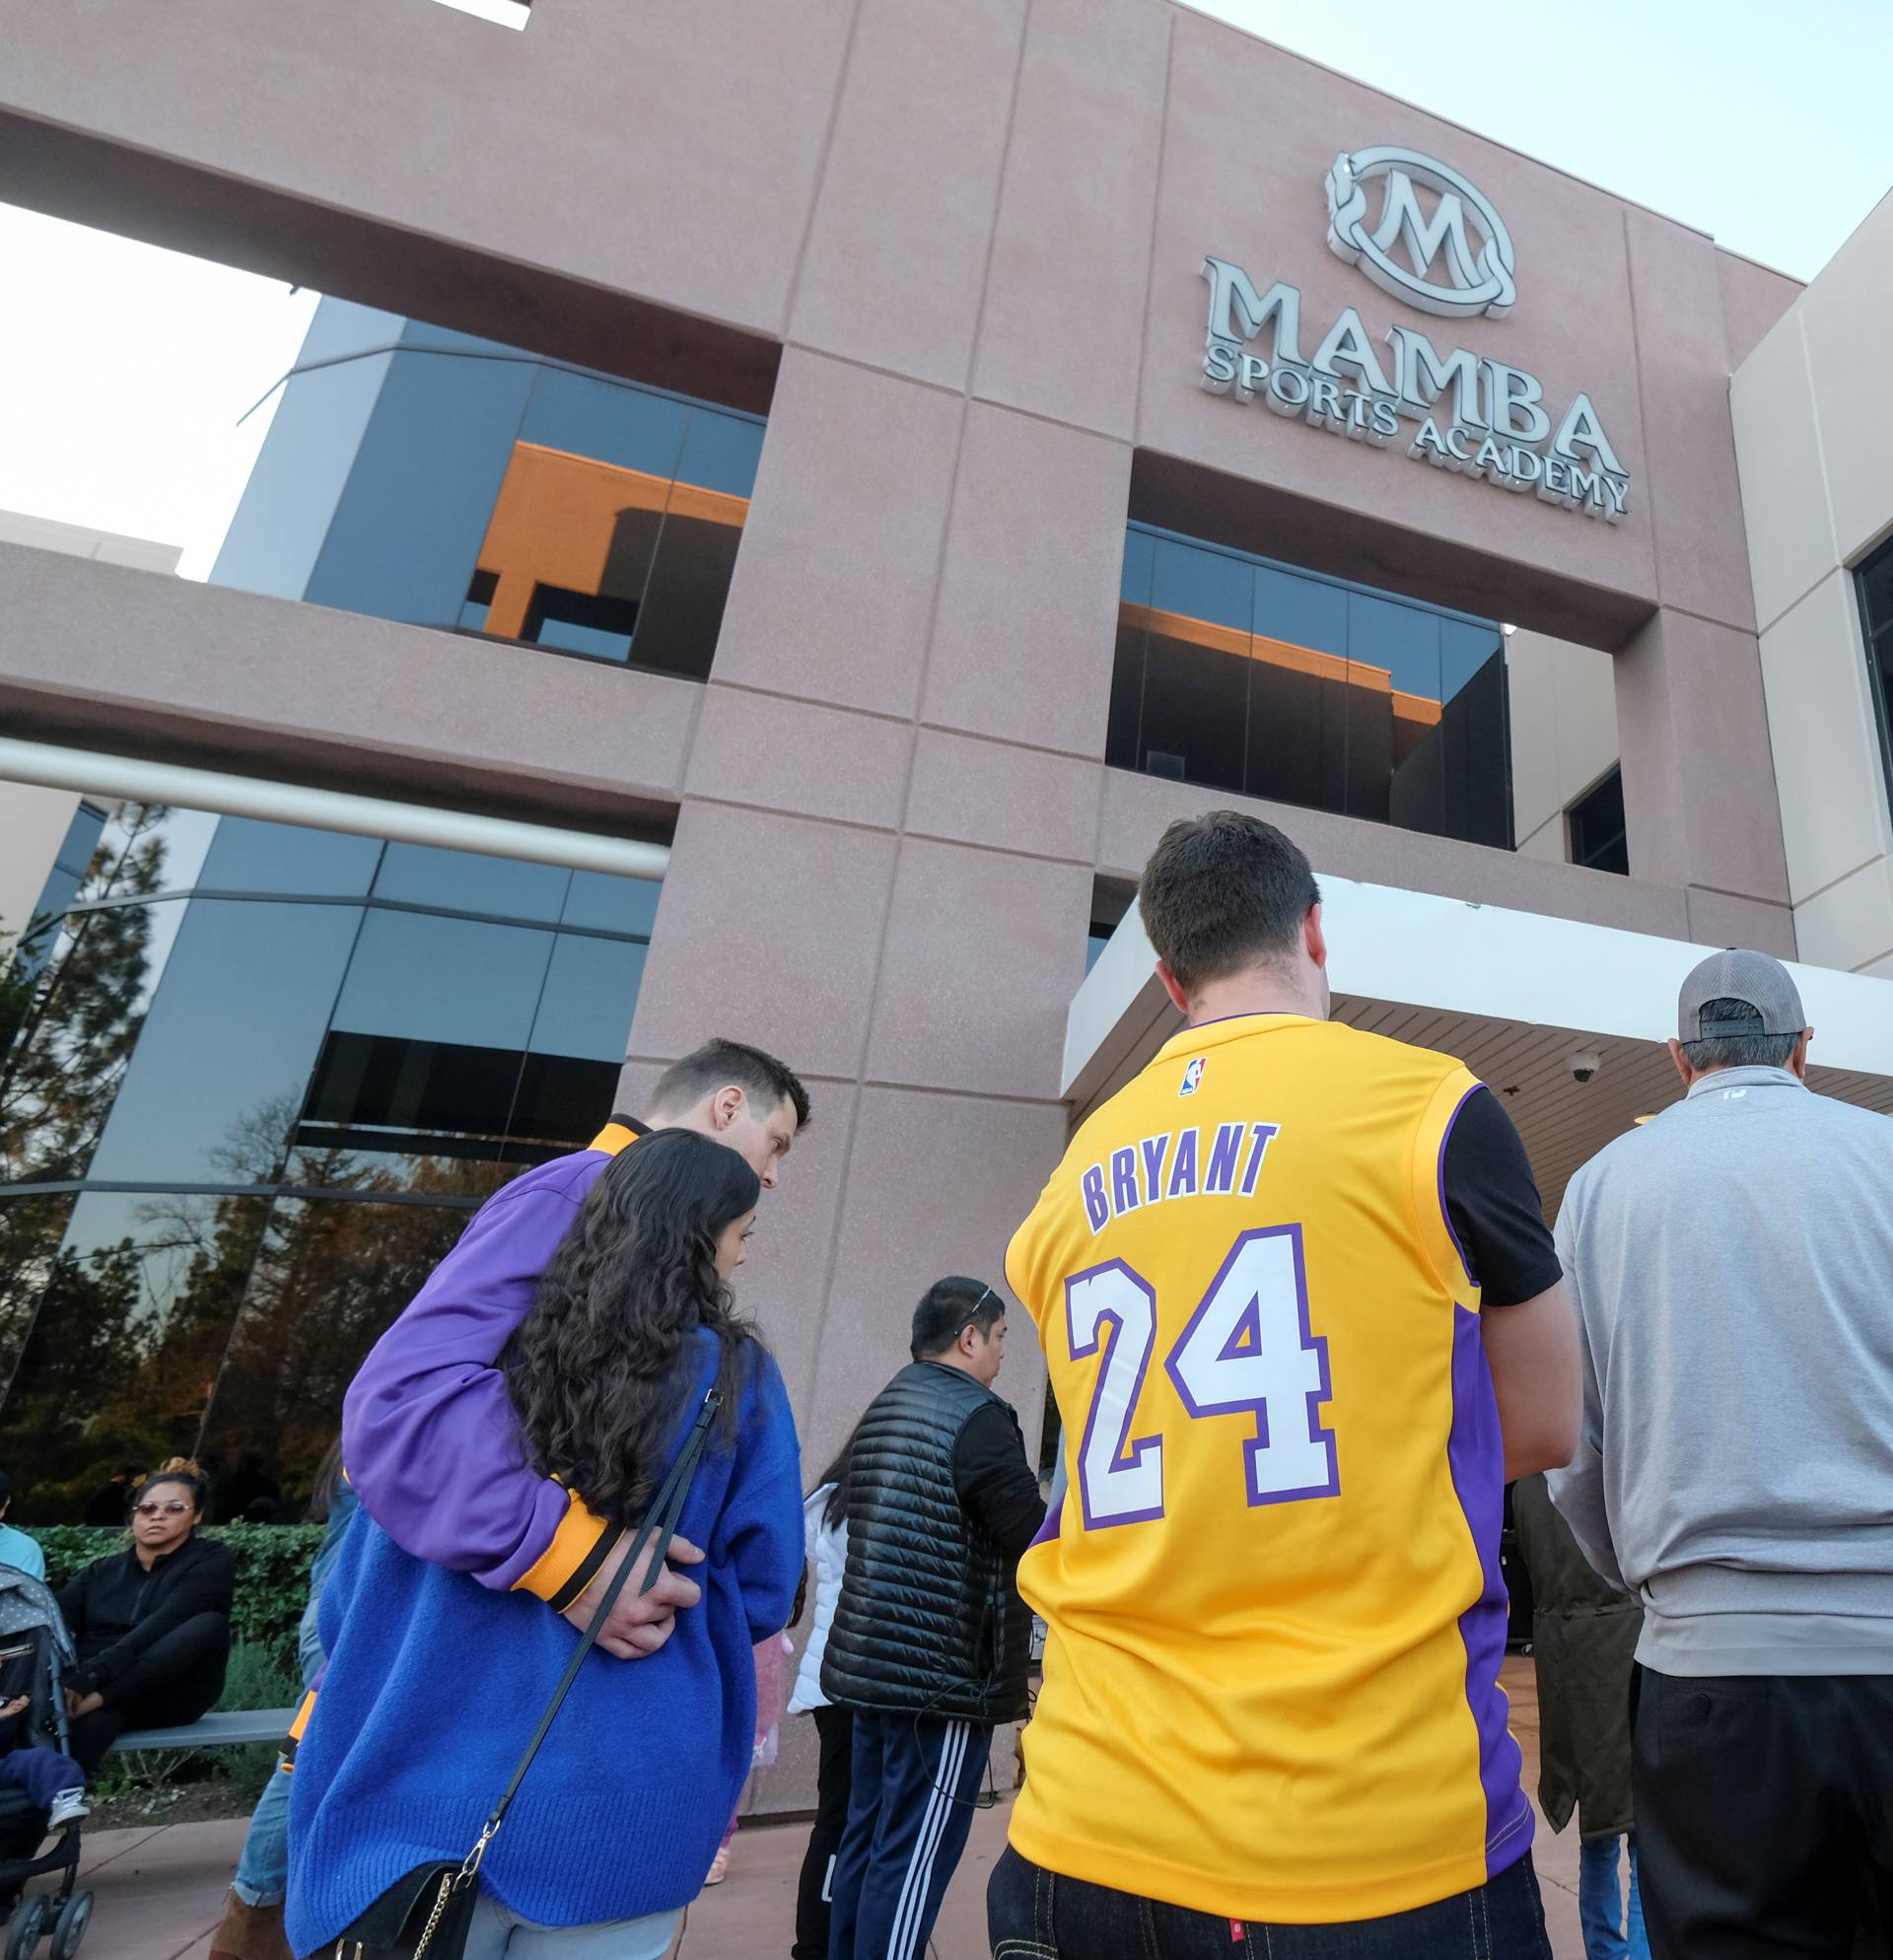 Fans gather at a makeshift memorial for former NBA player Kobe Bryant outside of the Mamba Sports Academy in Thousand Oaks